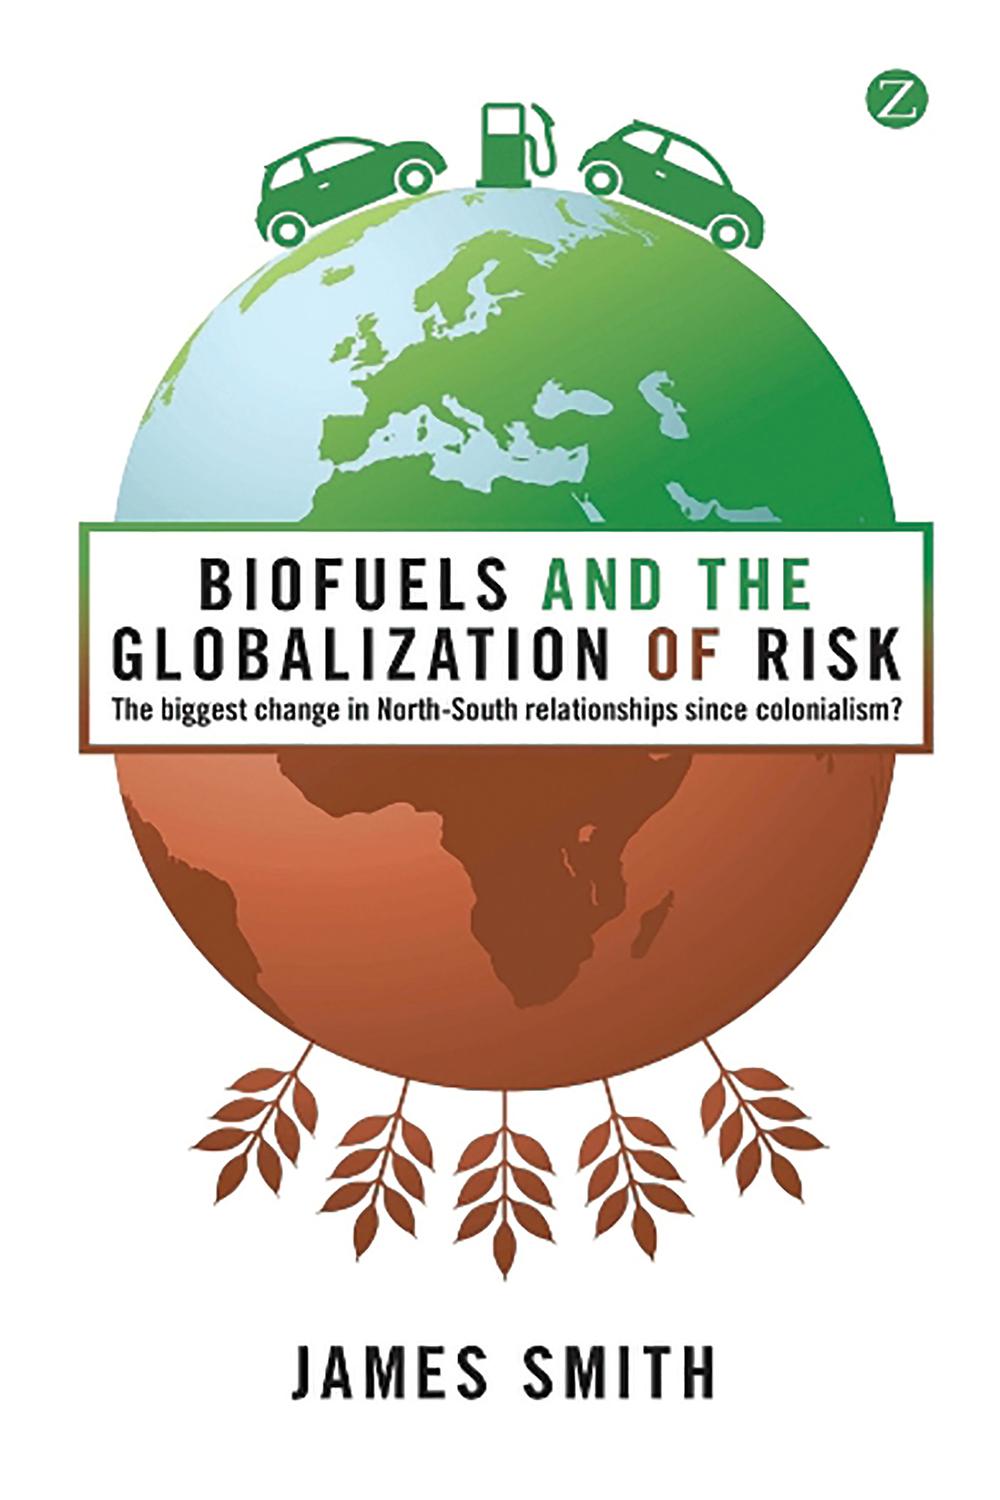 Biofuels and the Globalization of Risk - James Smith